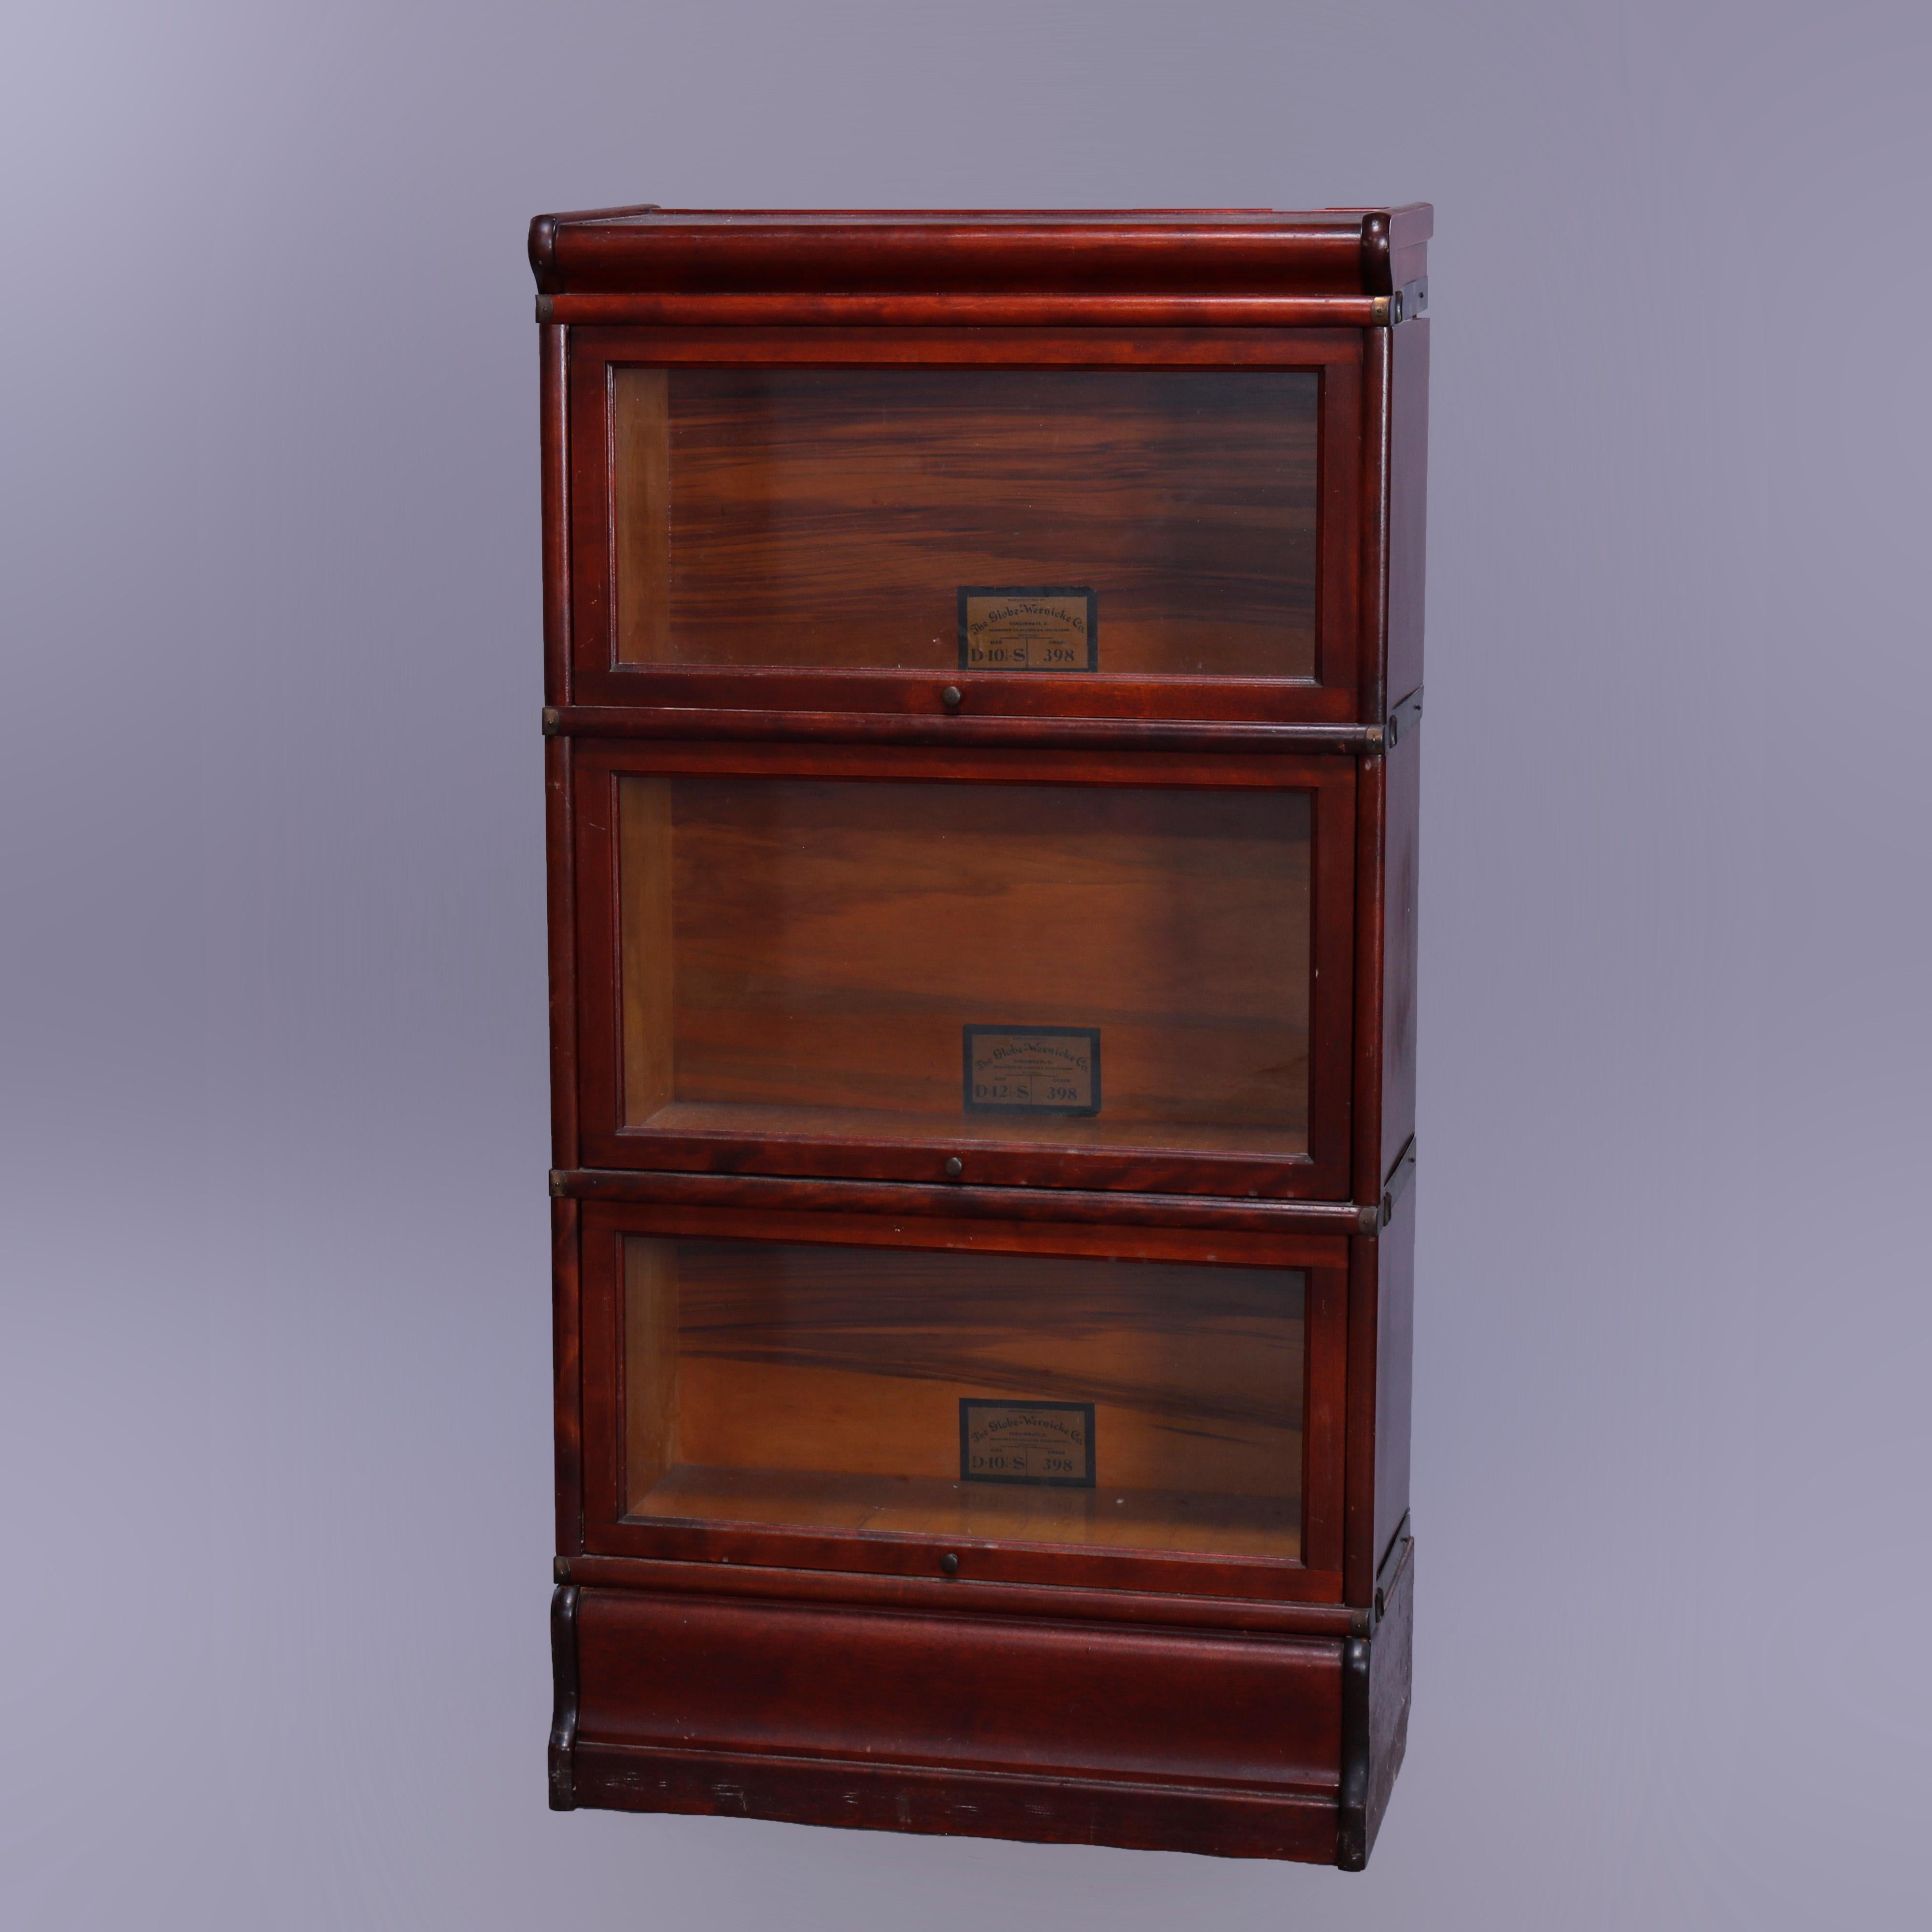 An antique Arts & Crafts Barrister bookcase by Globe Wernicke offers mahogany construction in diminutive form having three stacks, each with pull-out glass doors, seated on ogee base, original labels as photographed, c1910

Measures - 49.5'' H x